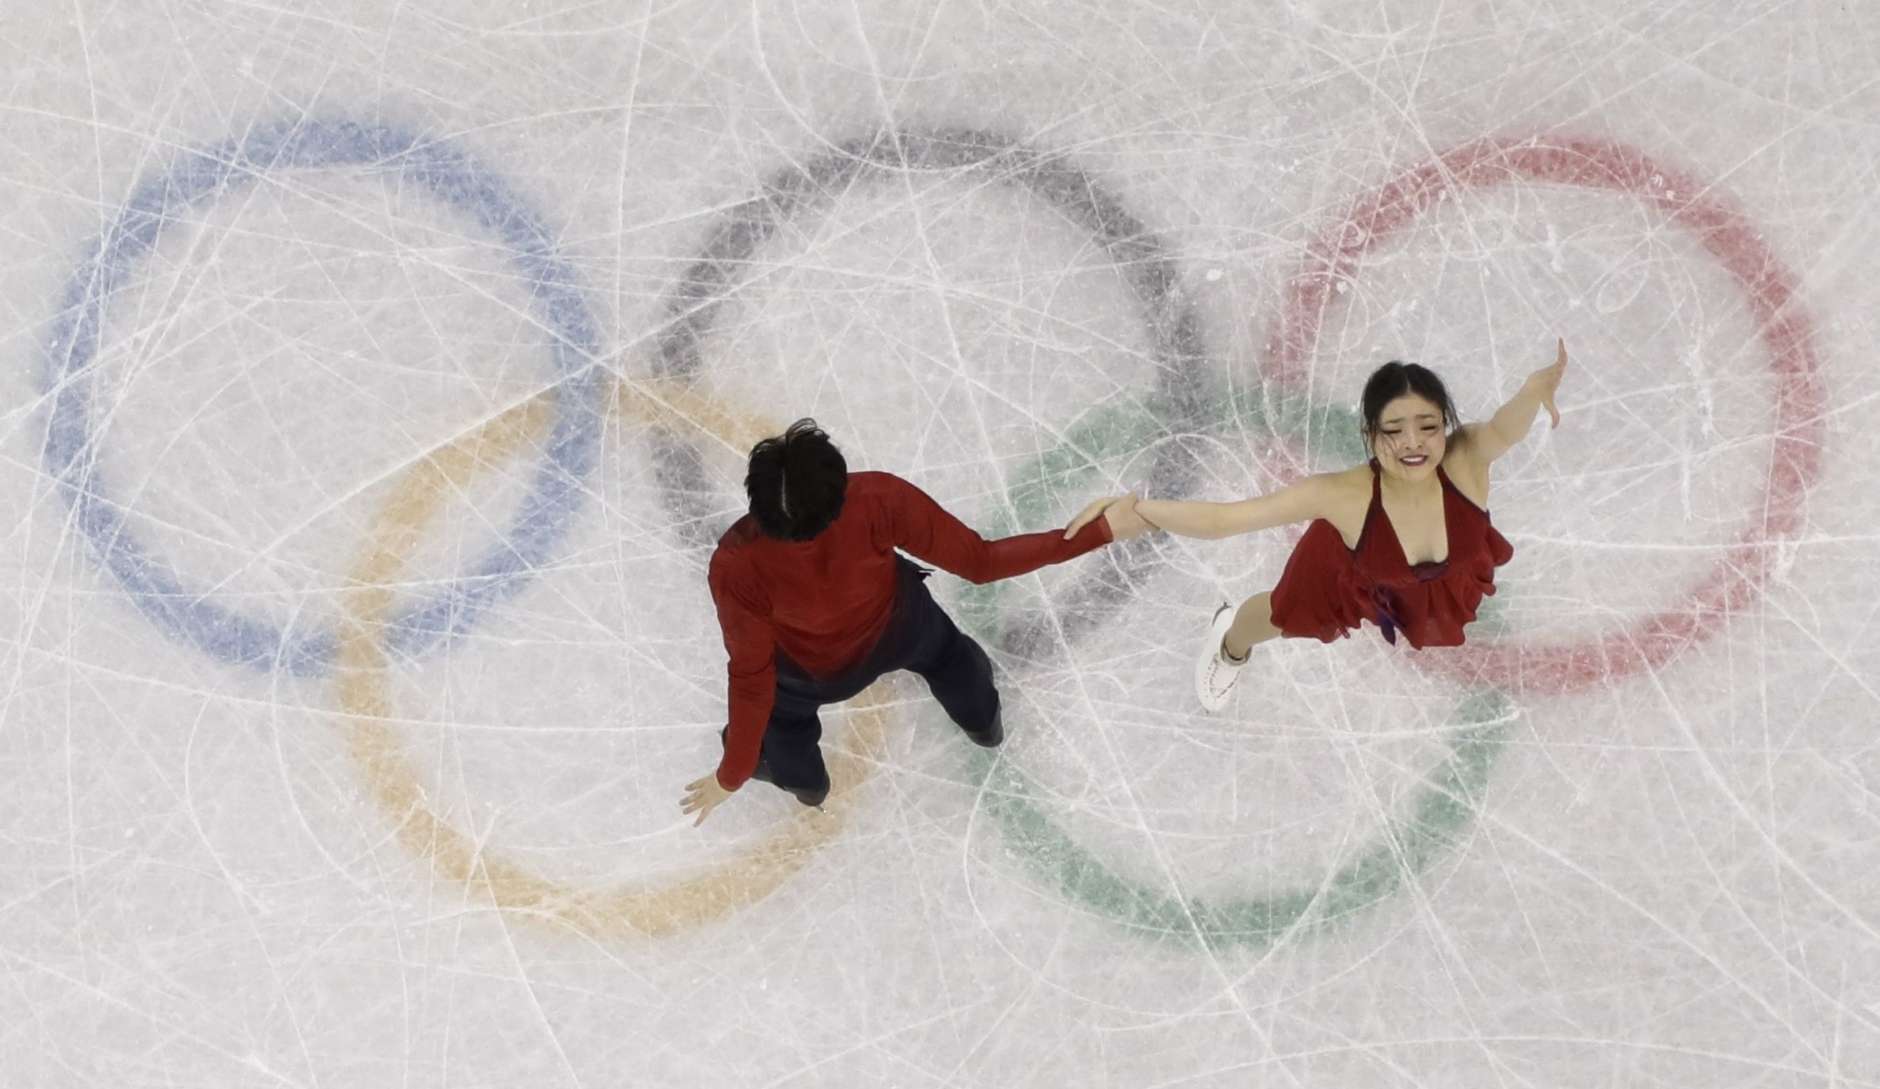 Maia Shibutani and Alex Shibutani of the United States perform during the ice dance, free dance figure skating final in the Gangneung Ice Arena at the 2018 Winter Olympics in Gangneung, South Korea, Tuesday, Feb. 20, 2018. (AP Photo/Morry Gash)